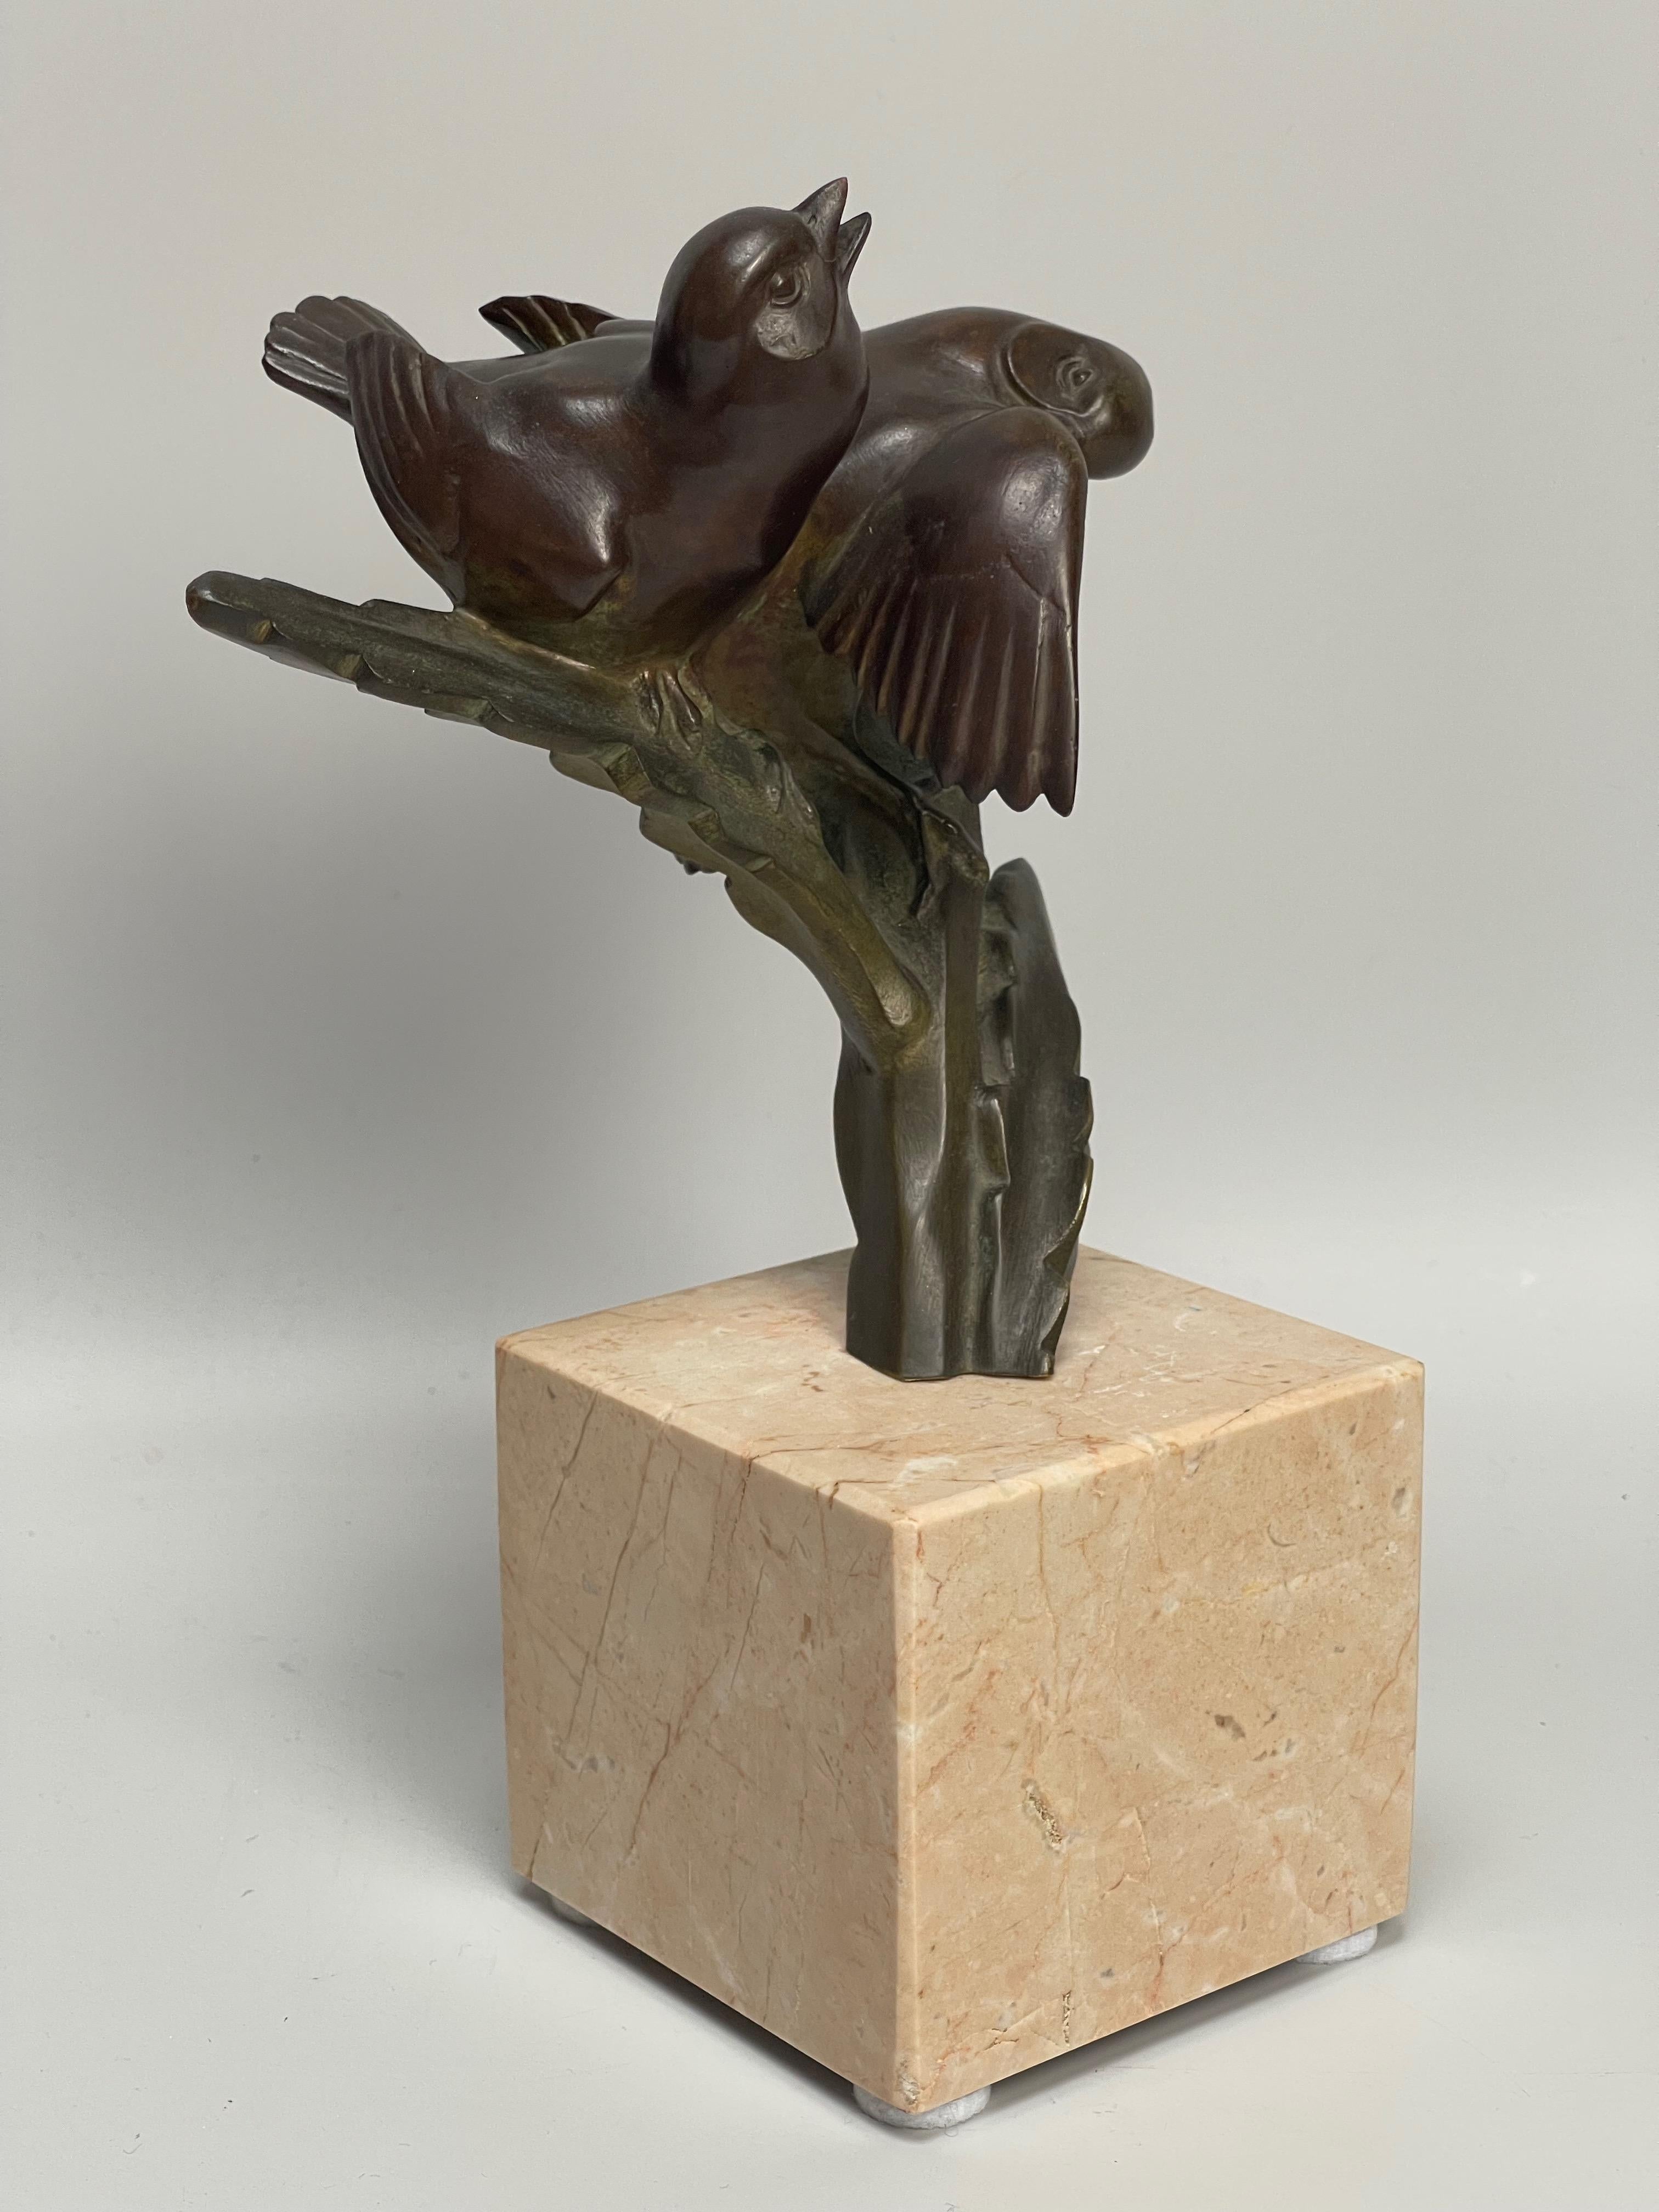 Bronze art deco around 1930.
Couple of birds on a branch all placed on a marble base.
Signed Laurent on the marble for Georges H Laurent.
In perfect condition.

Measures: Height: 21cm
Base: 8cm x 8cm x 7cm
Weight: 2.6Kg

Georges H Laurent